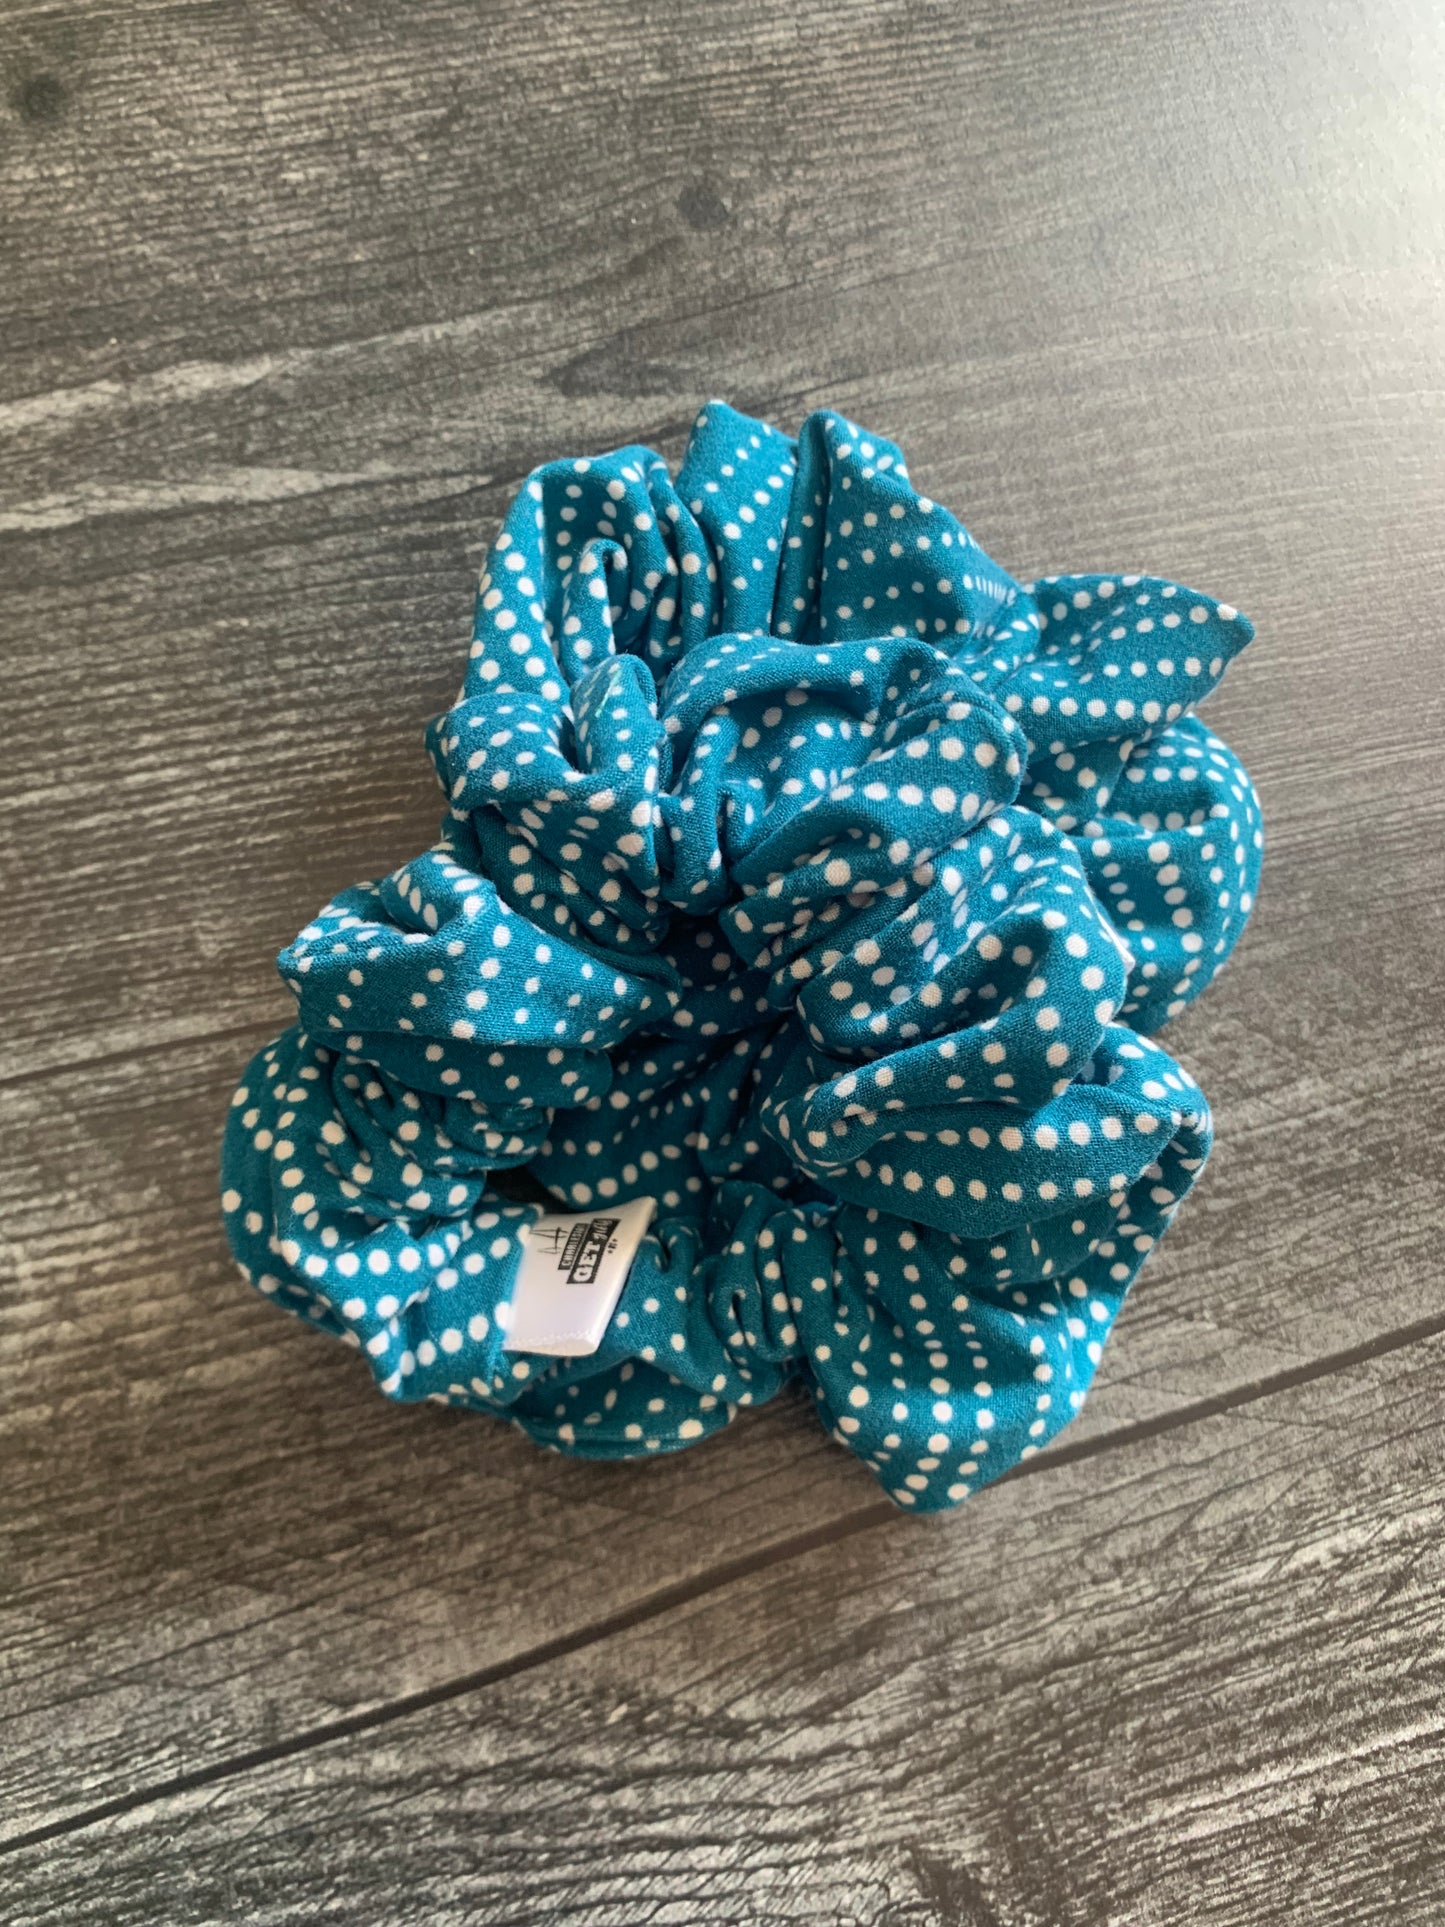 Blue with White Dots - Knit Scrunchie